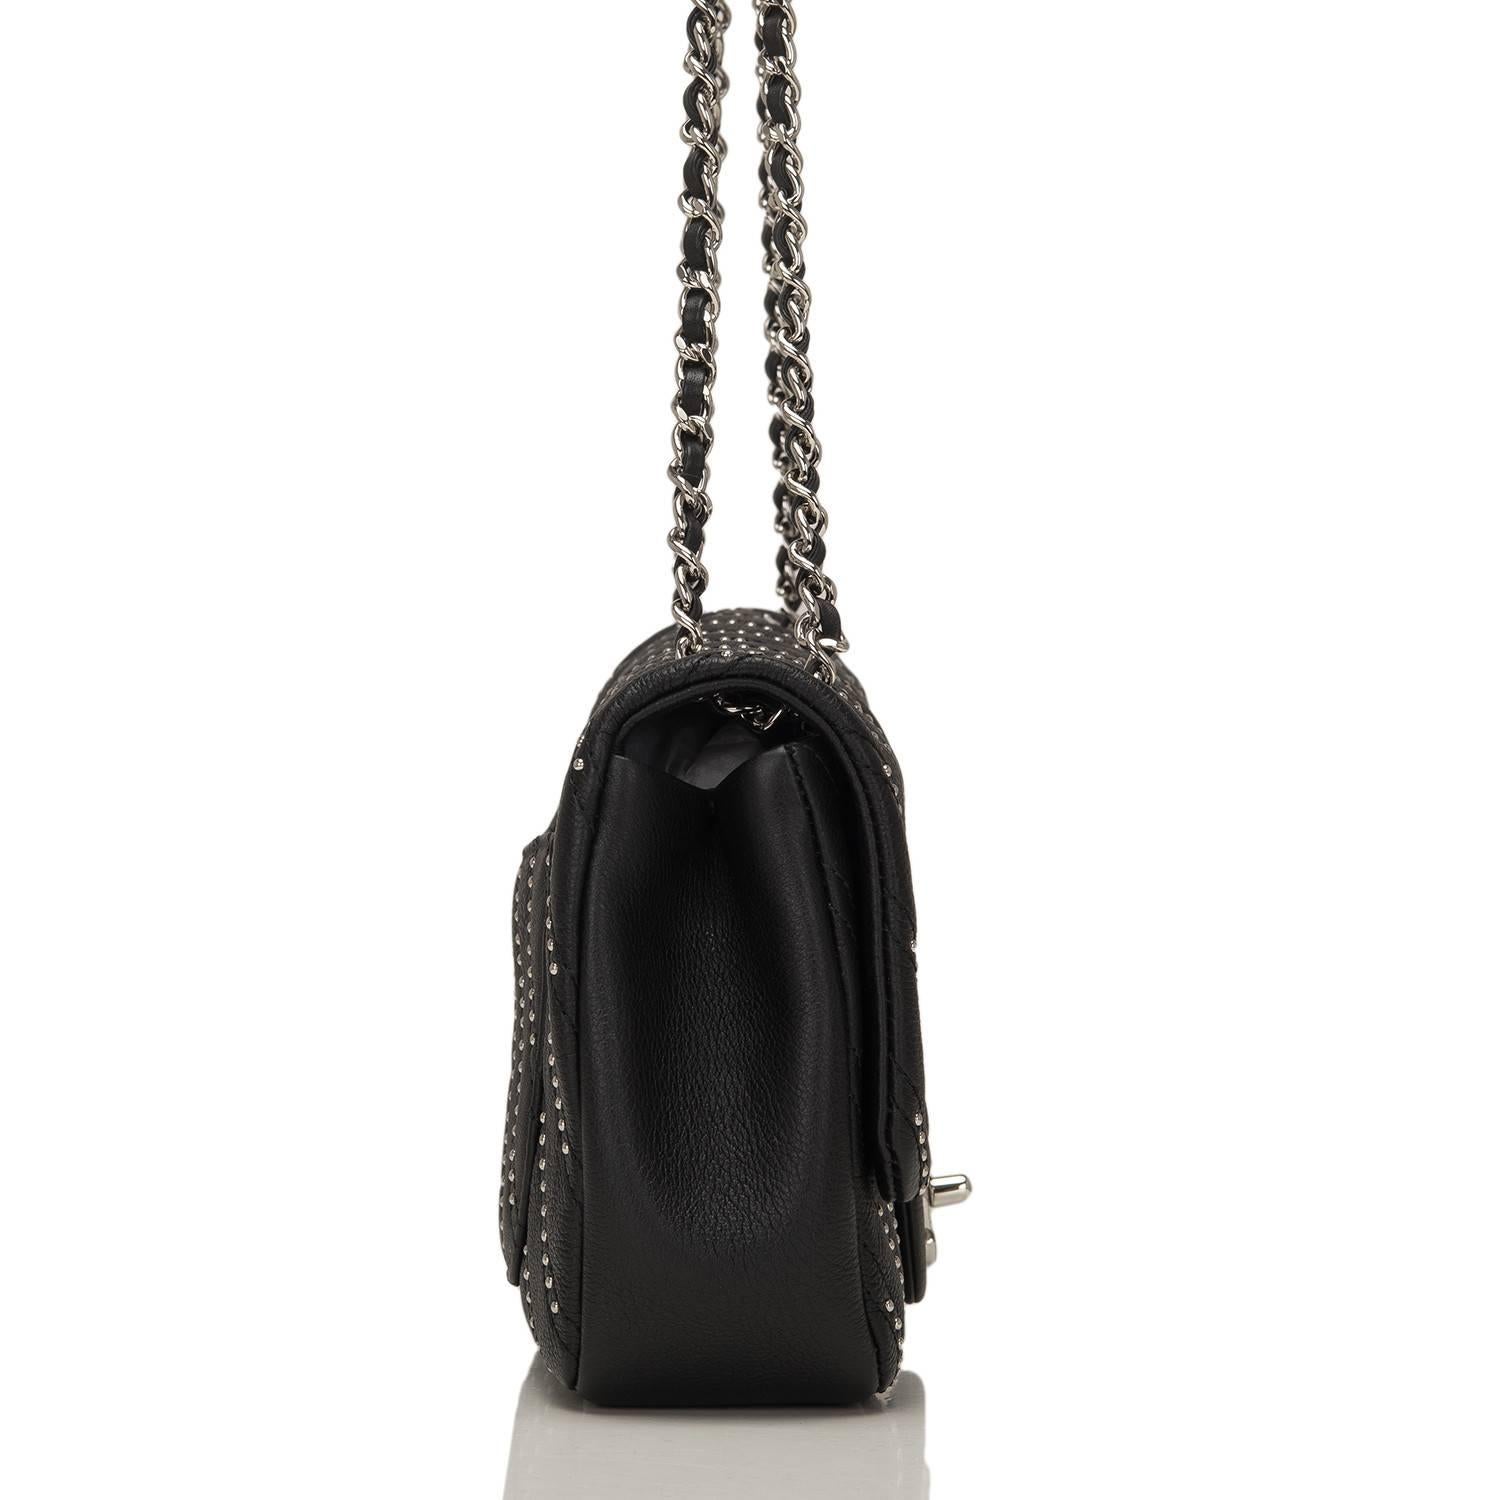 Chanel Black Studded Chevron Calfskin Flap Bag In New Condition For Sale In New York, NY